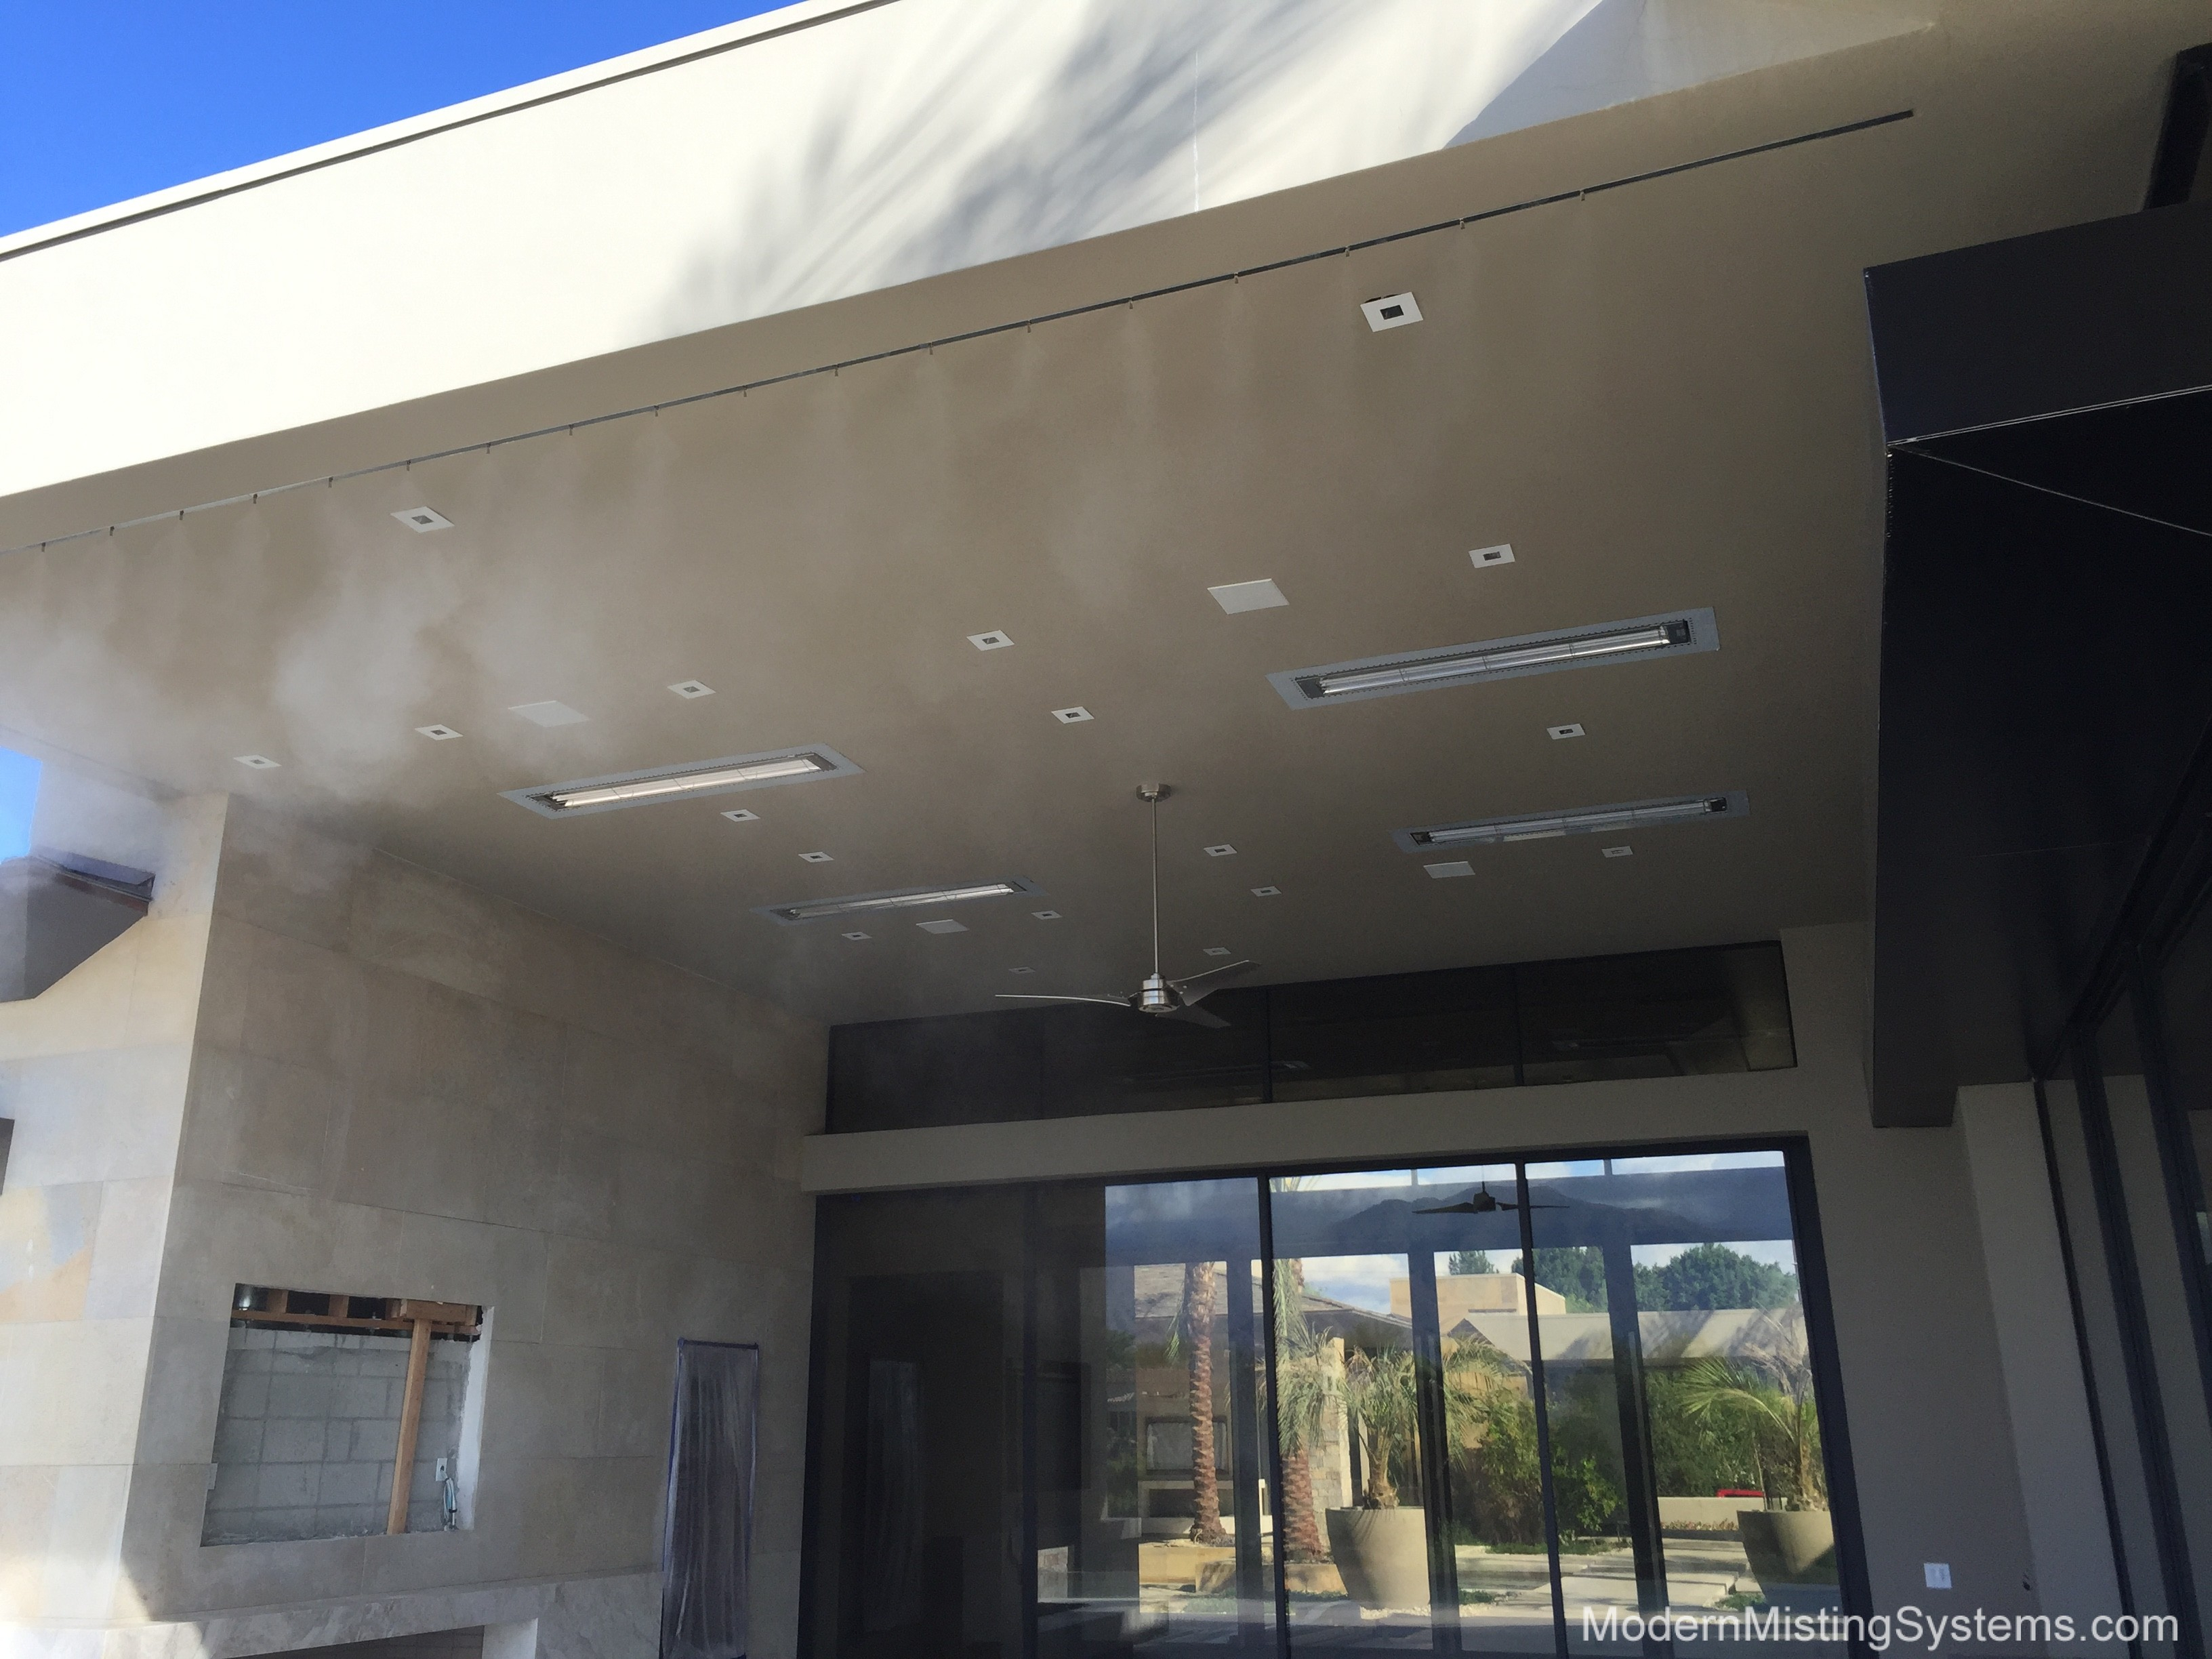 Patio Heaters Modern Misting Systems For Palm Springs And intended for proportions 3264 X 2448